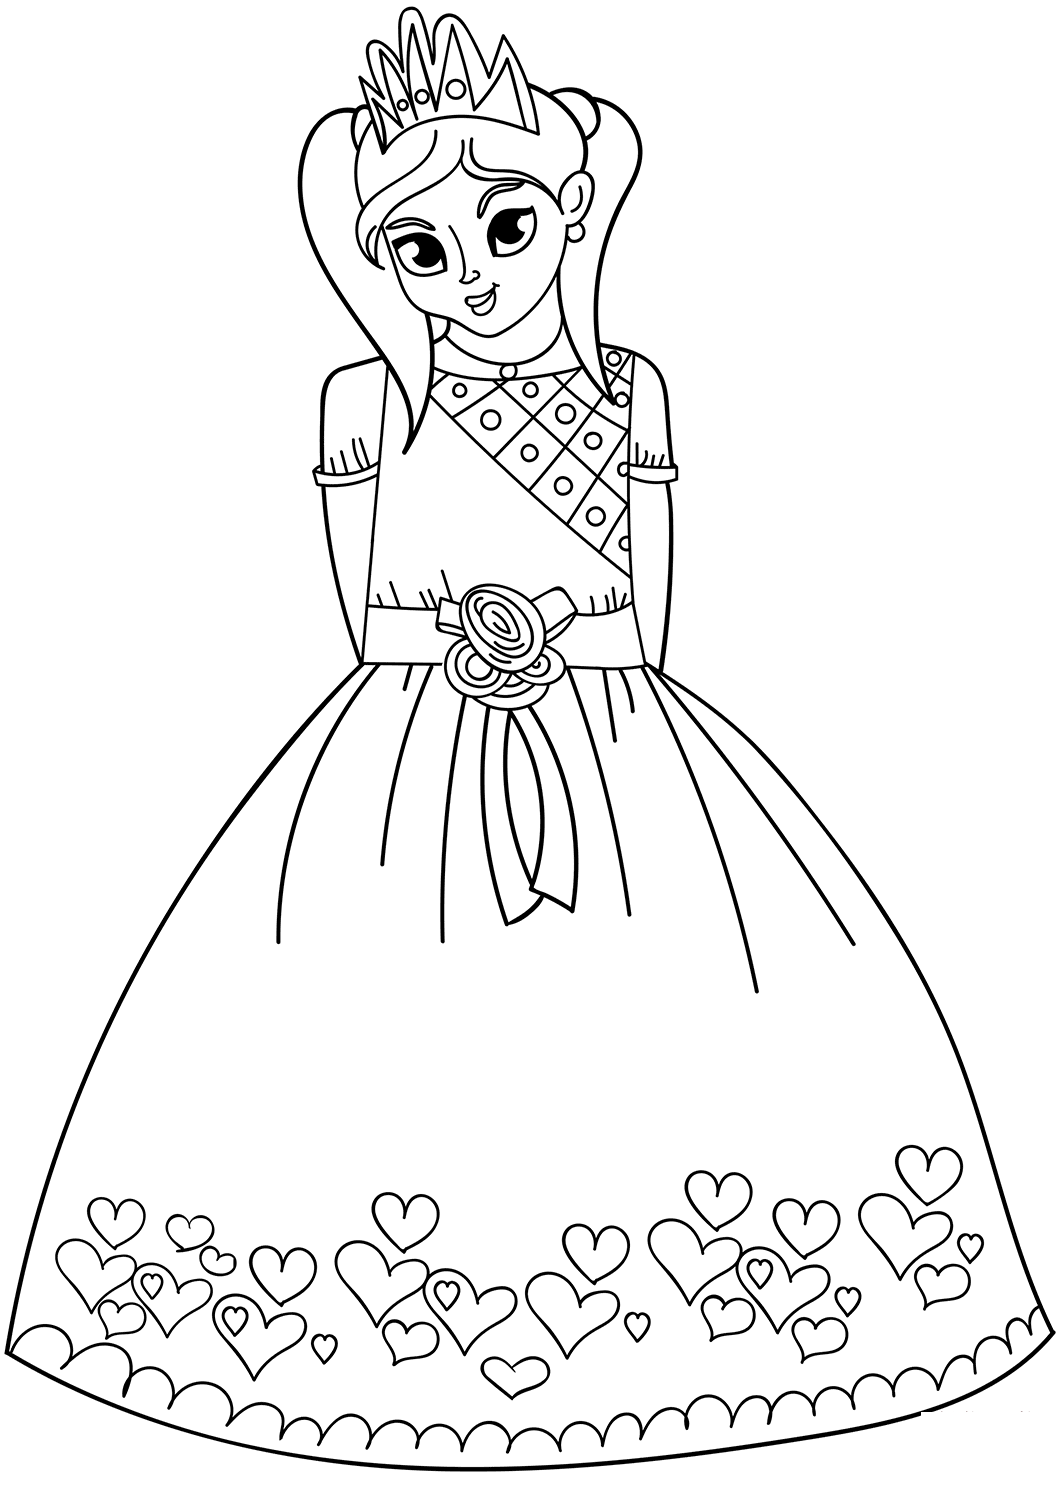 Princess Crowned Head Coloring Page